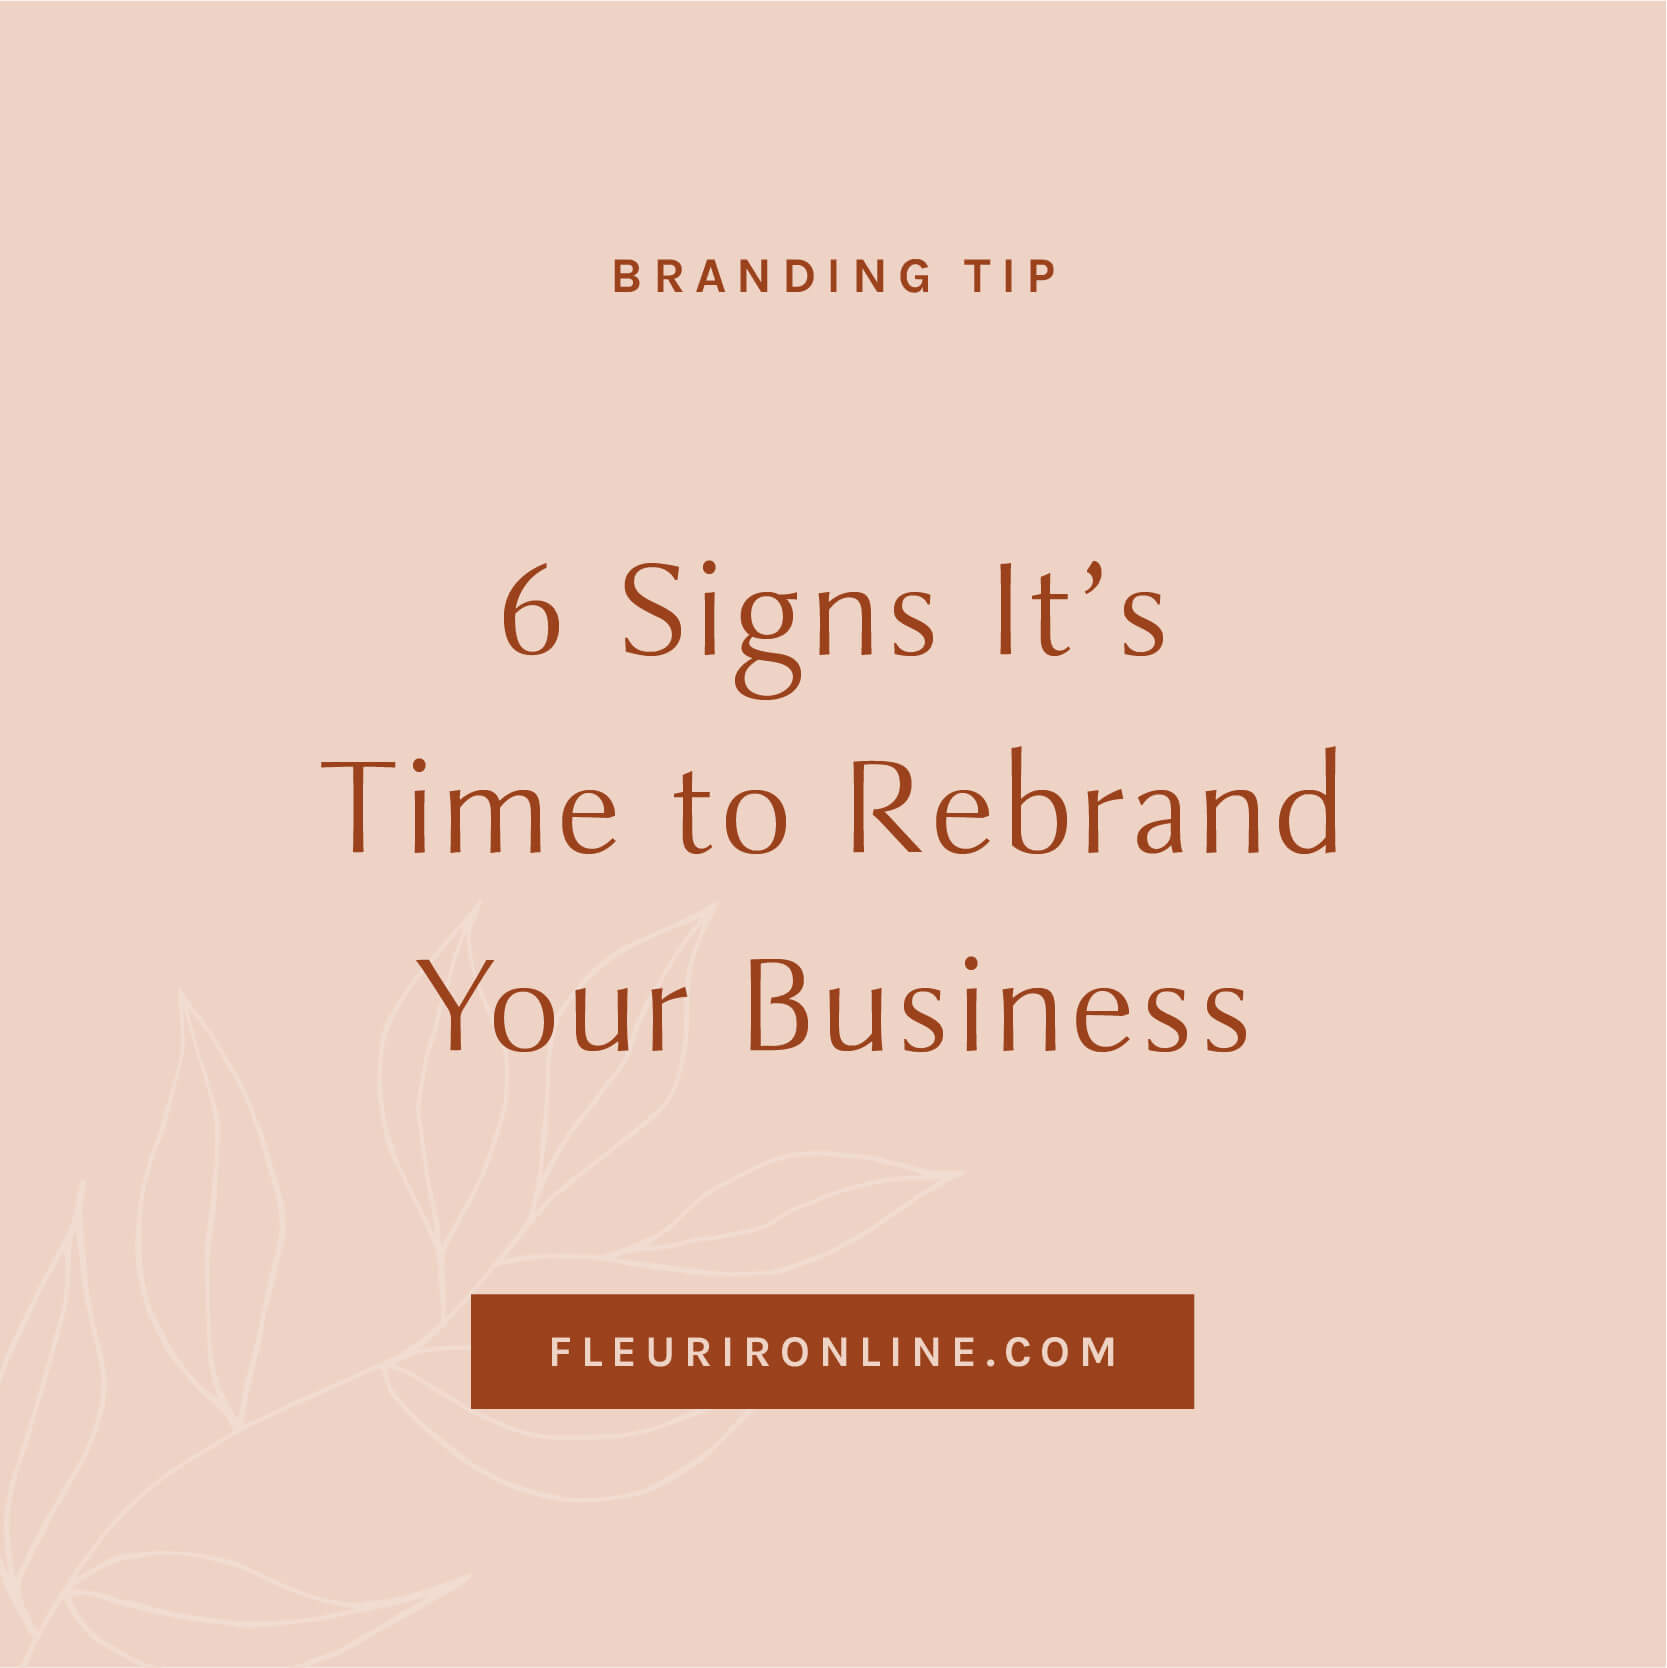 6 signs it's time to rebrand your business